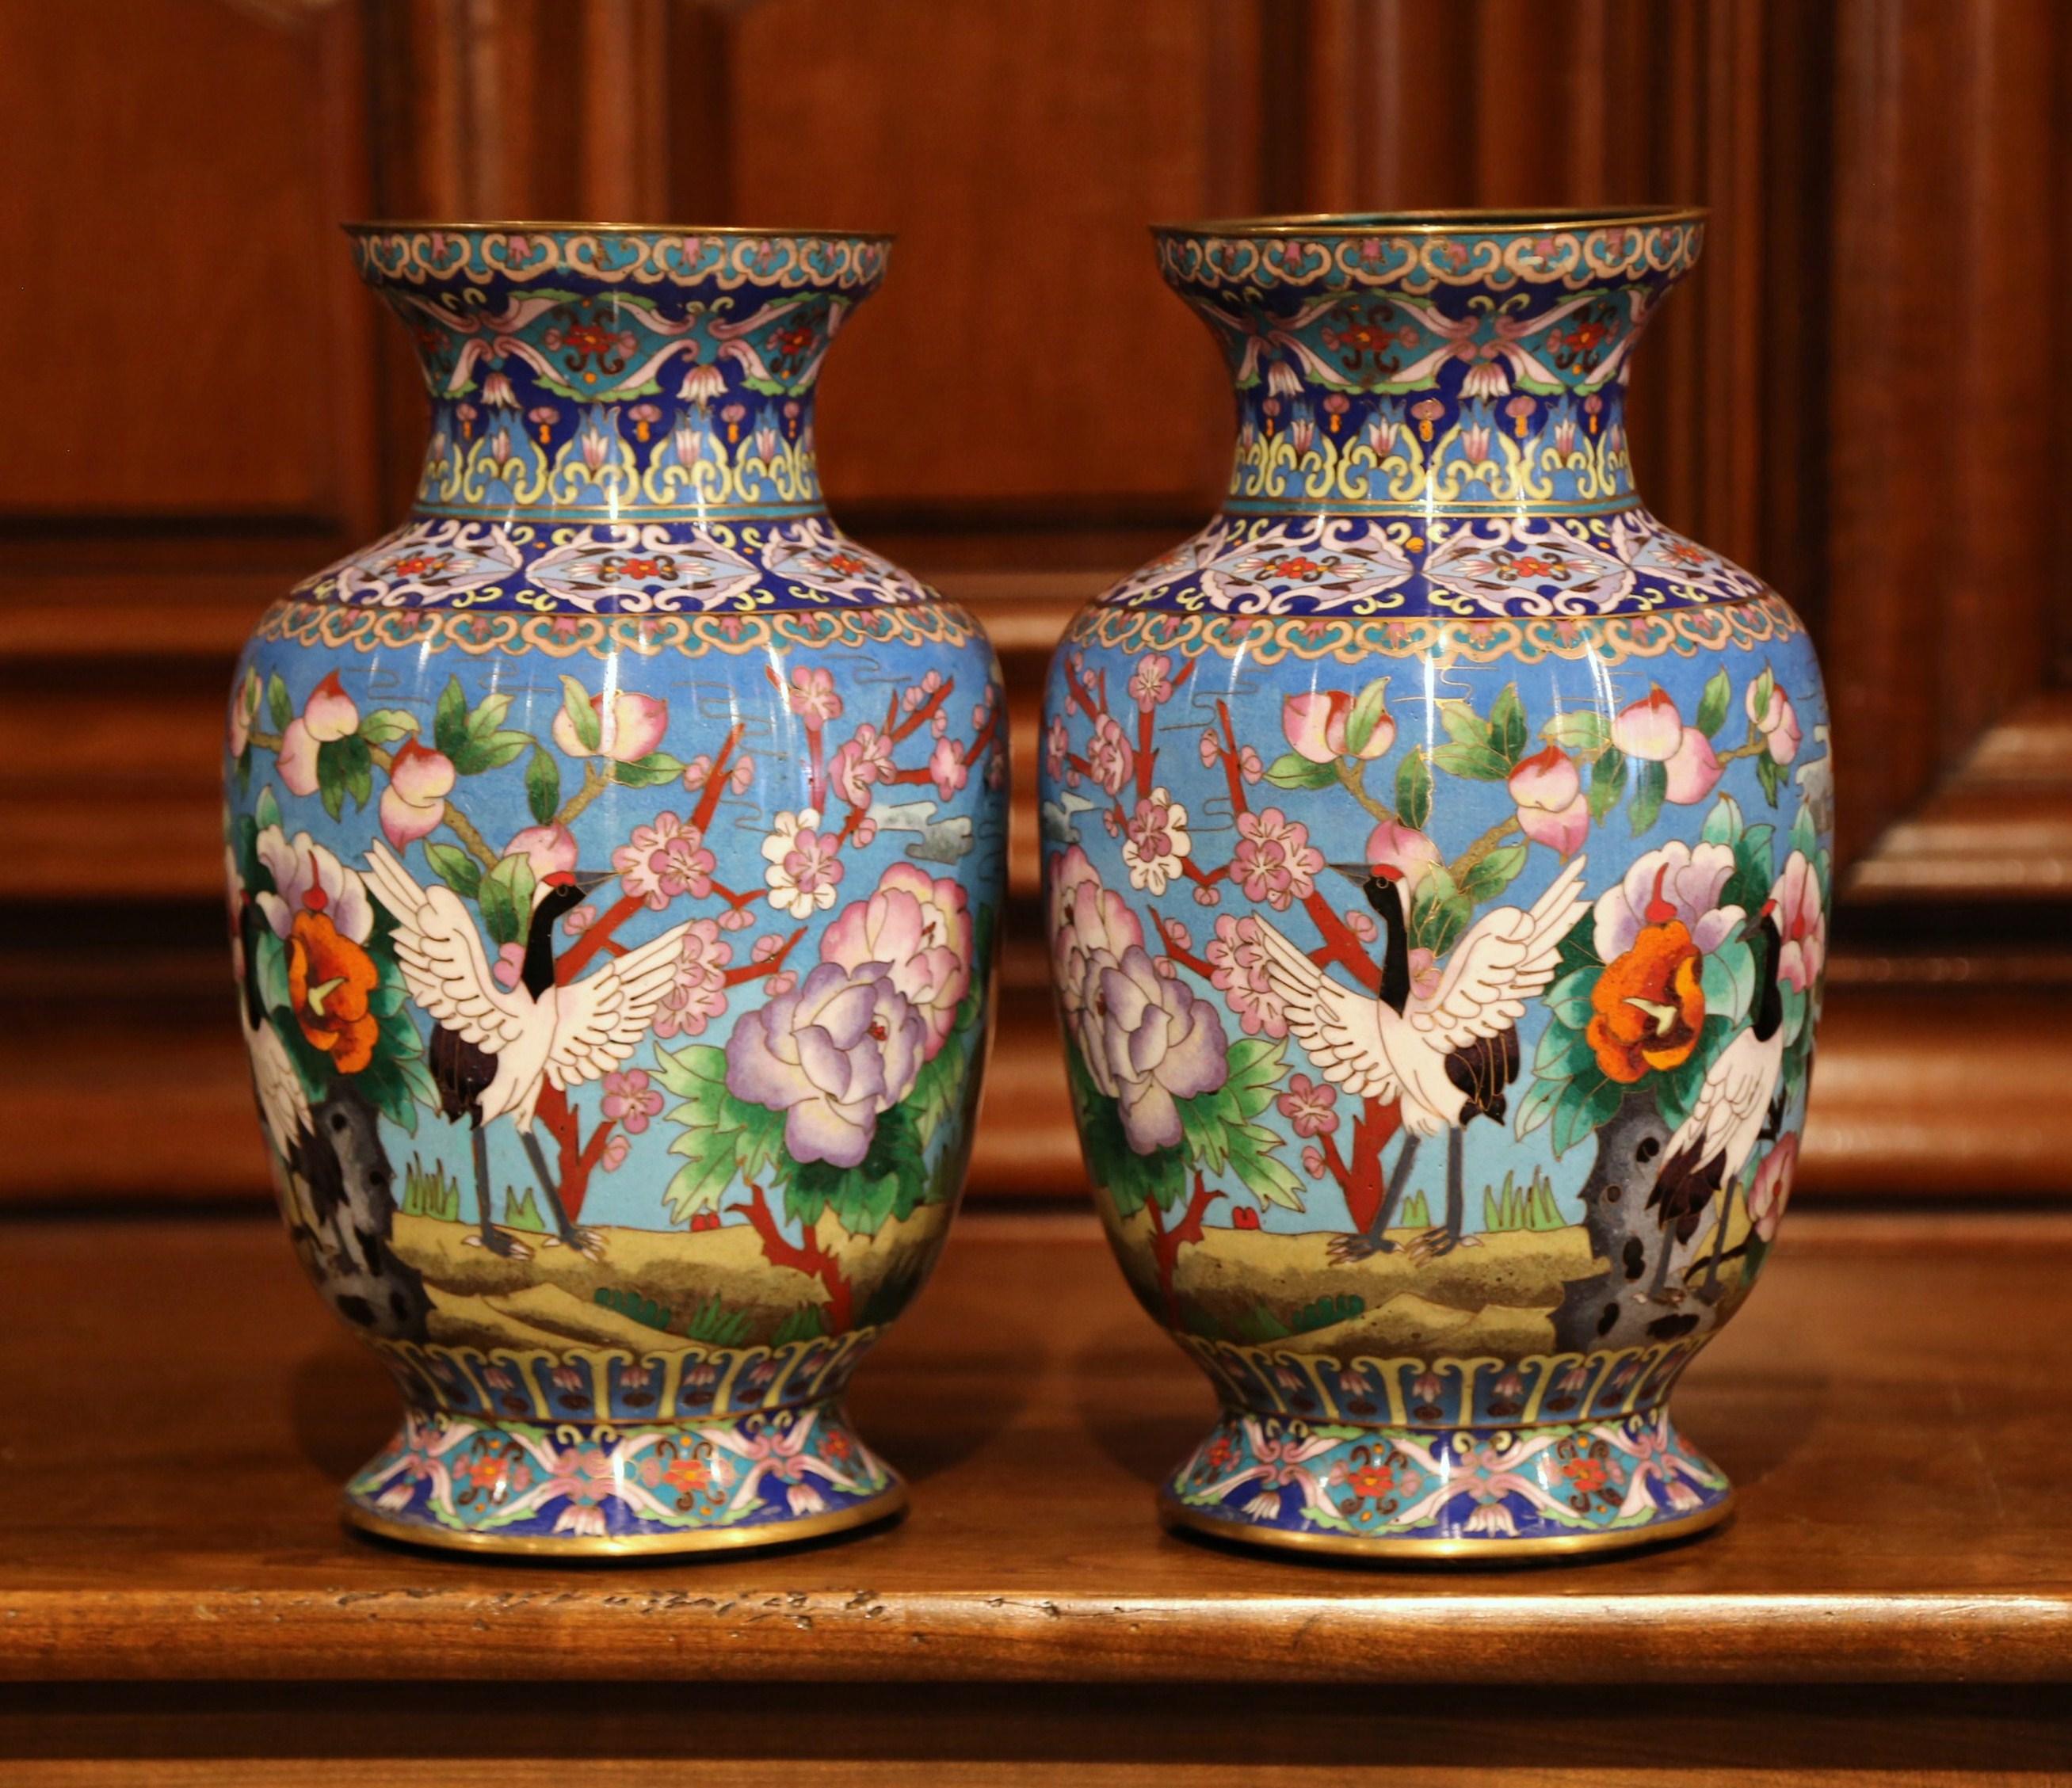 Brass Pair of Mid-20th Century Chinese Cloisonné Vases with Bird and Floral Decor